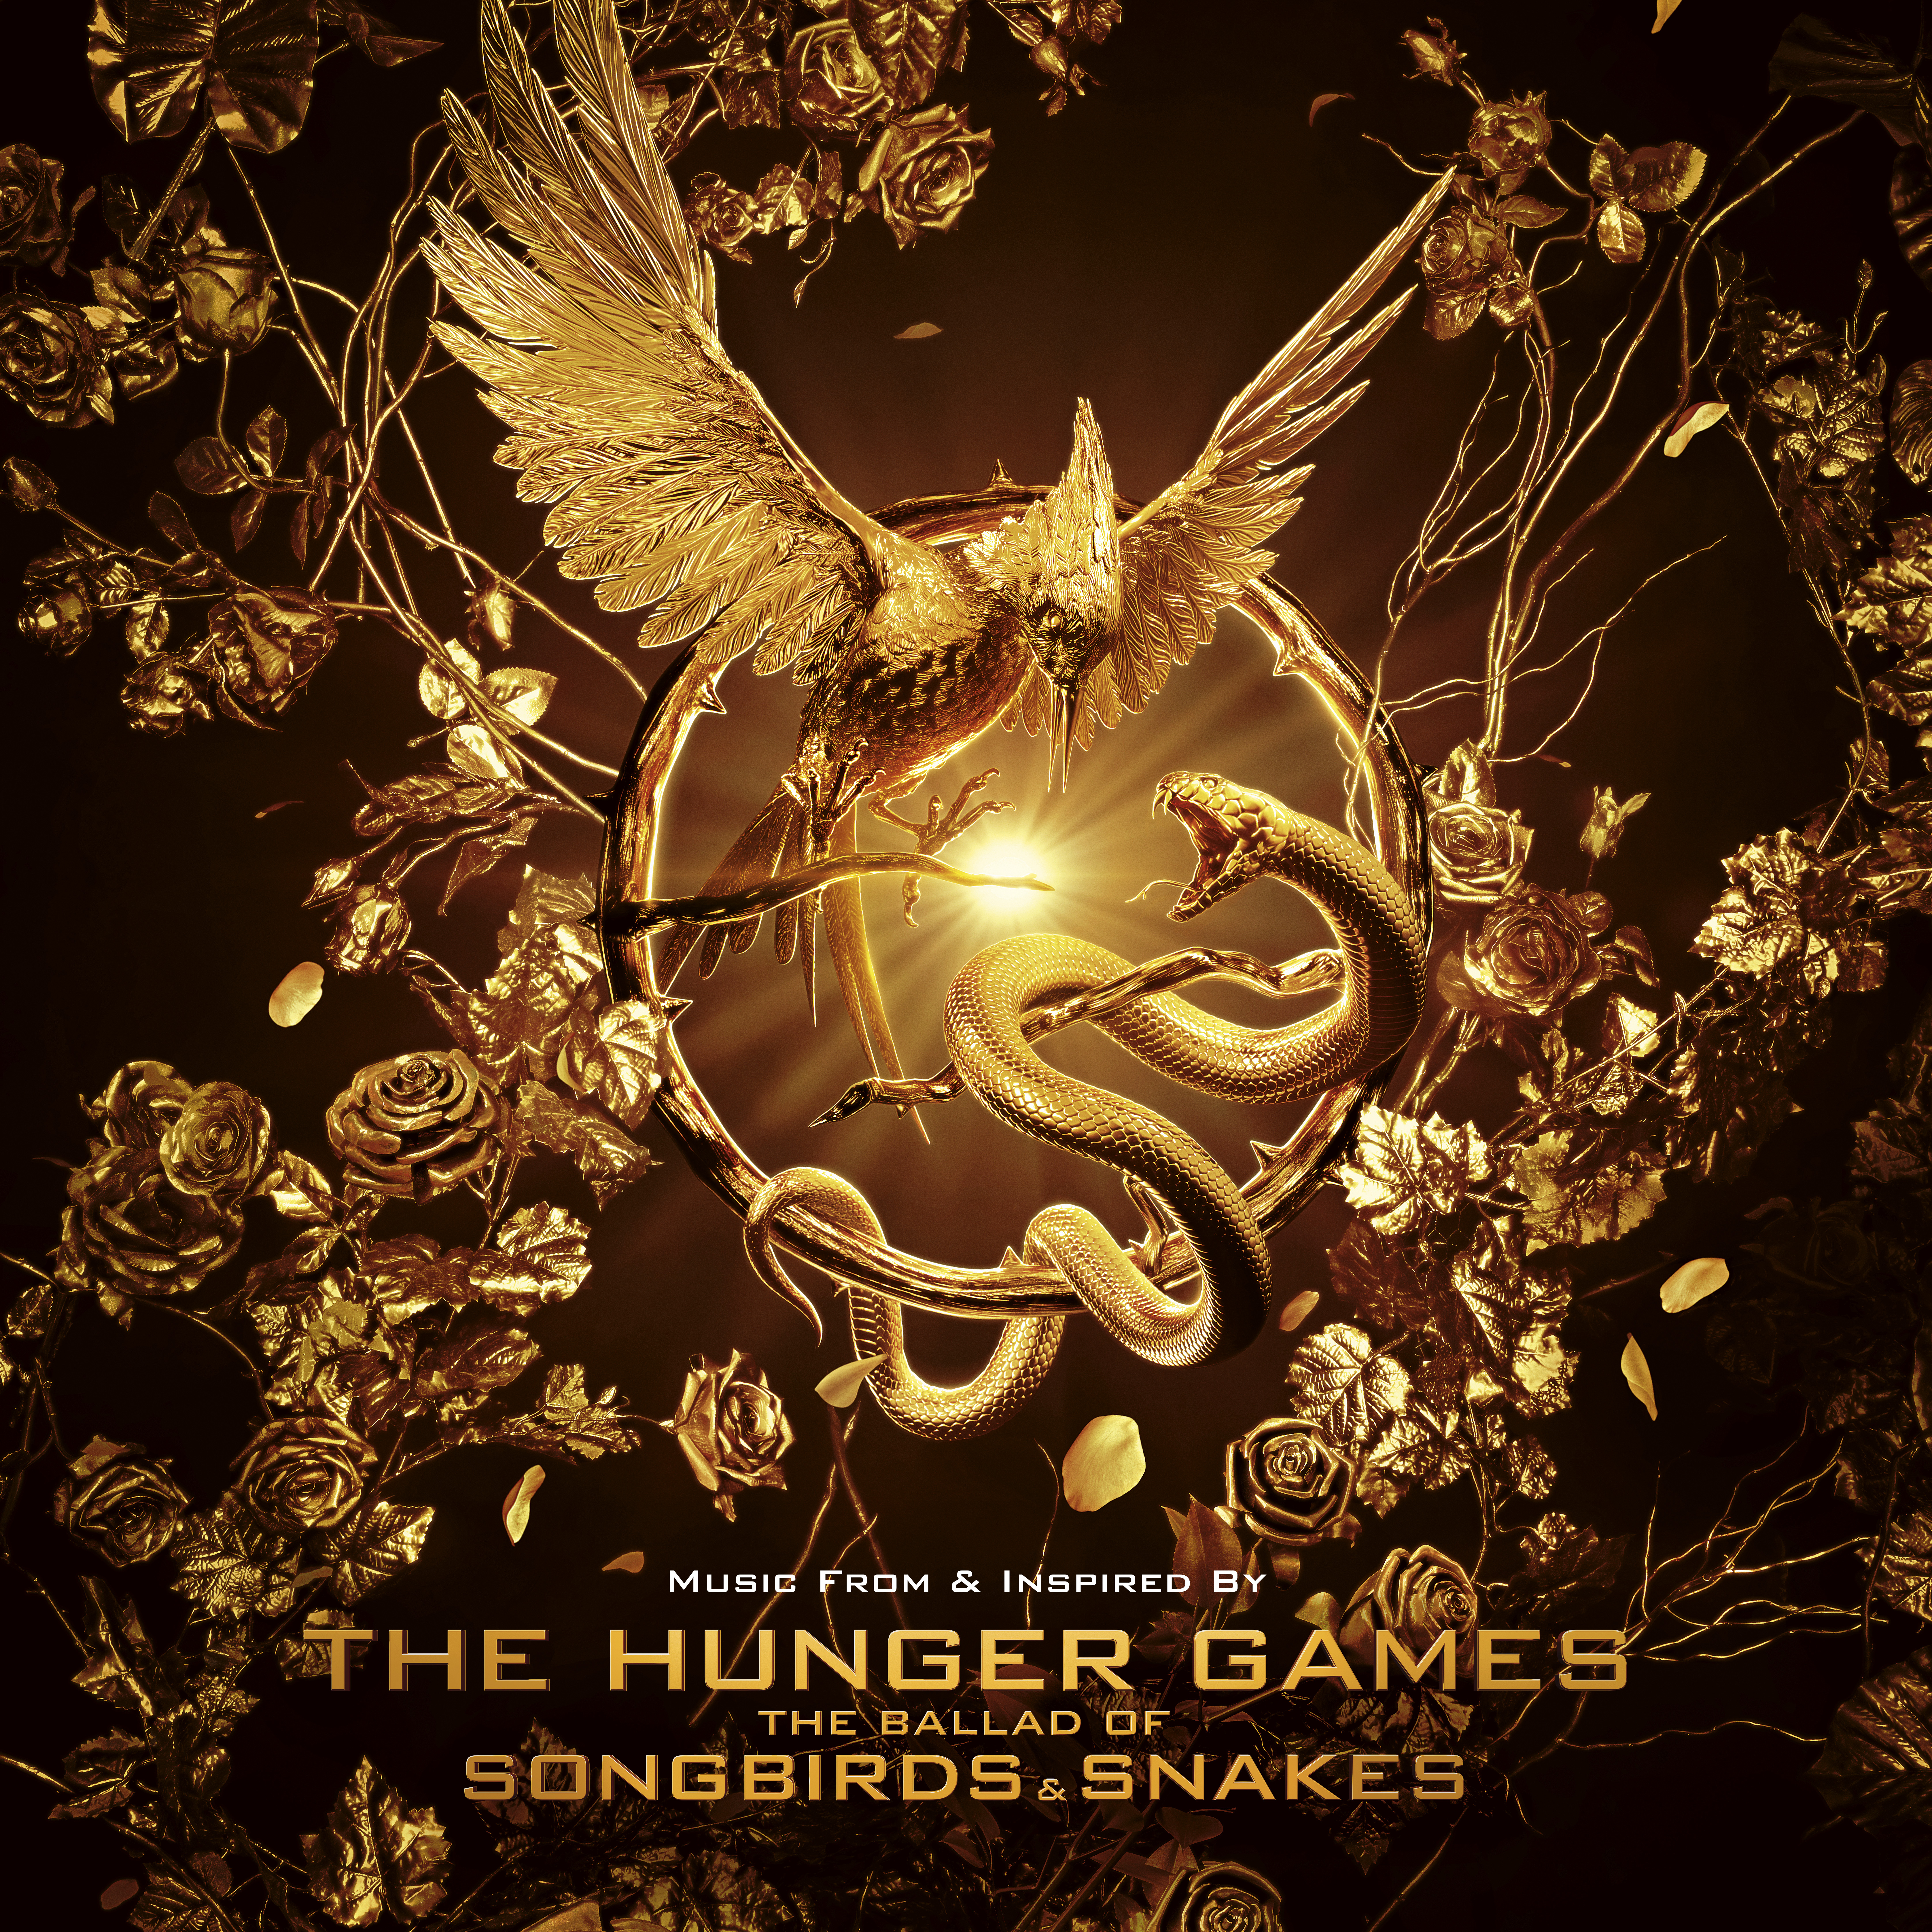 The Hunger Games prequel soundtrack